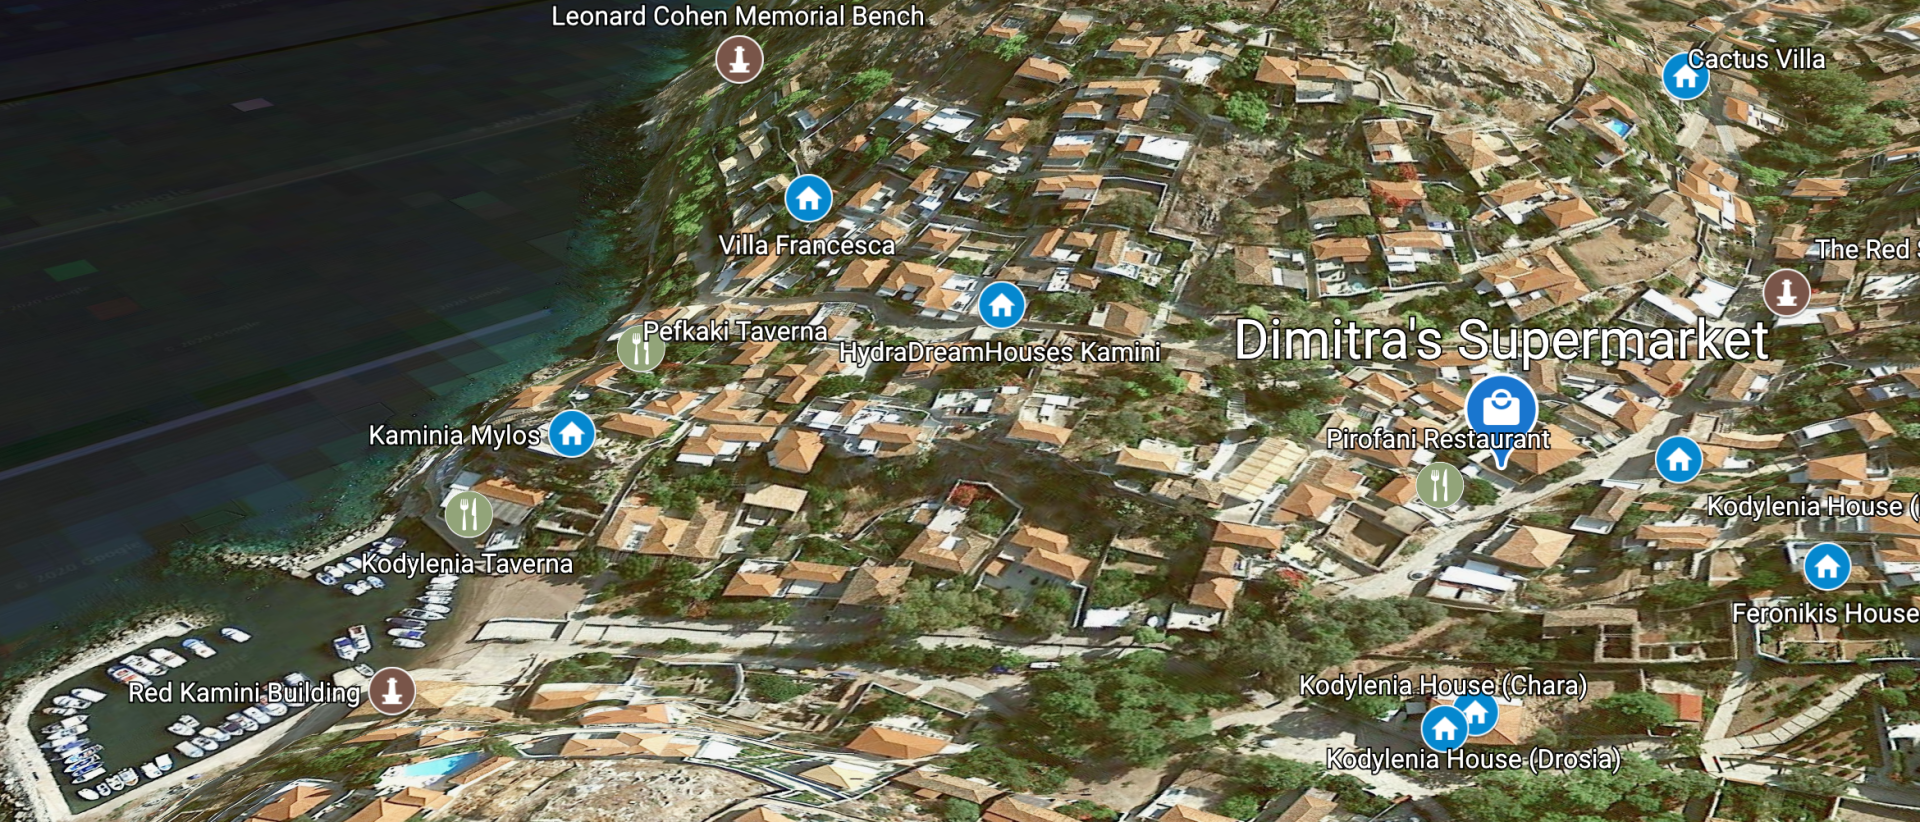 Map to find the Dimitra's Supermarket on the Greek Island of Hydra.